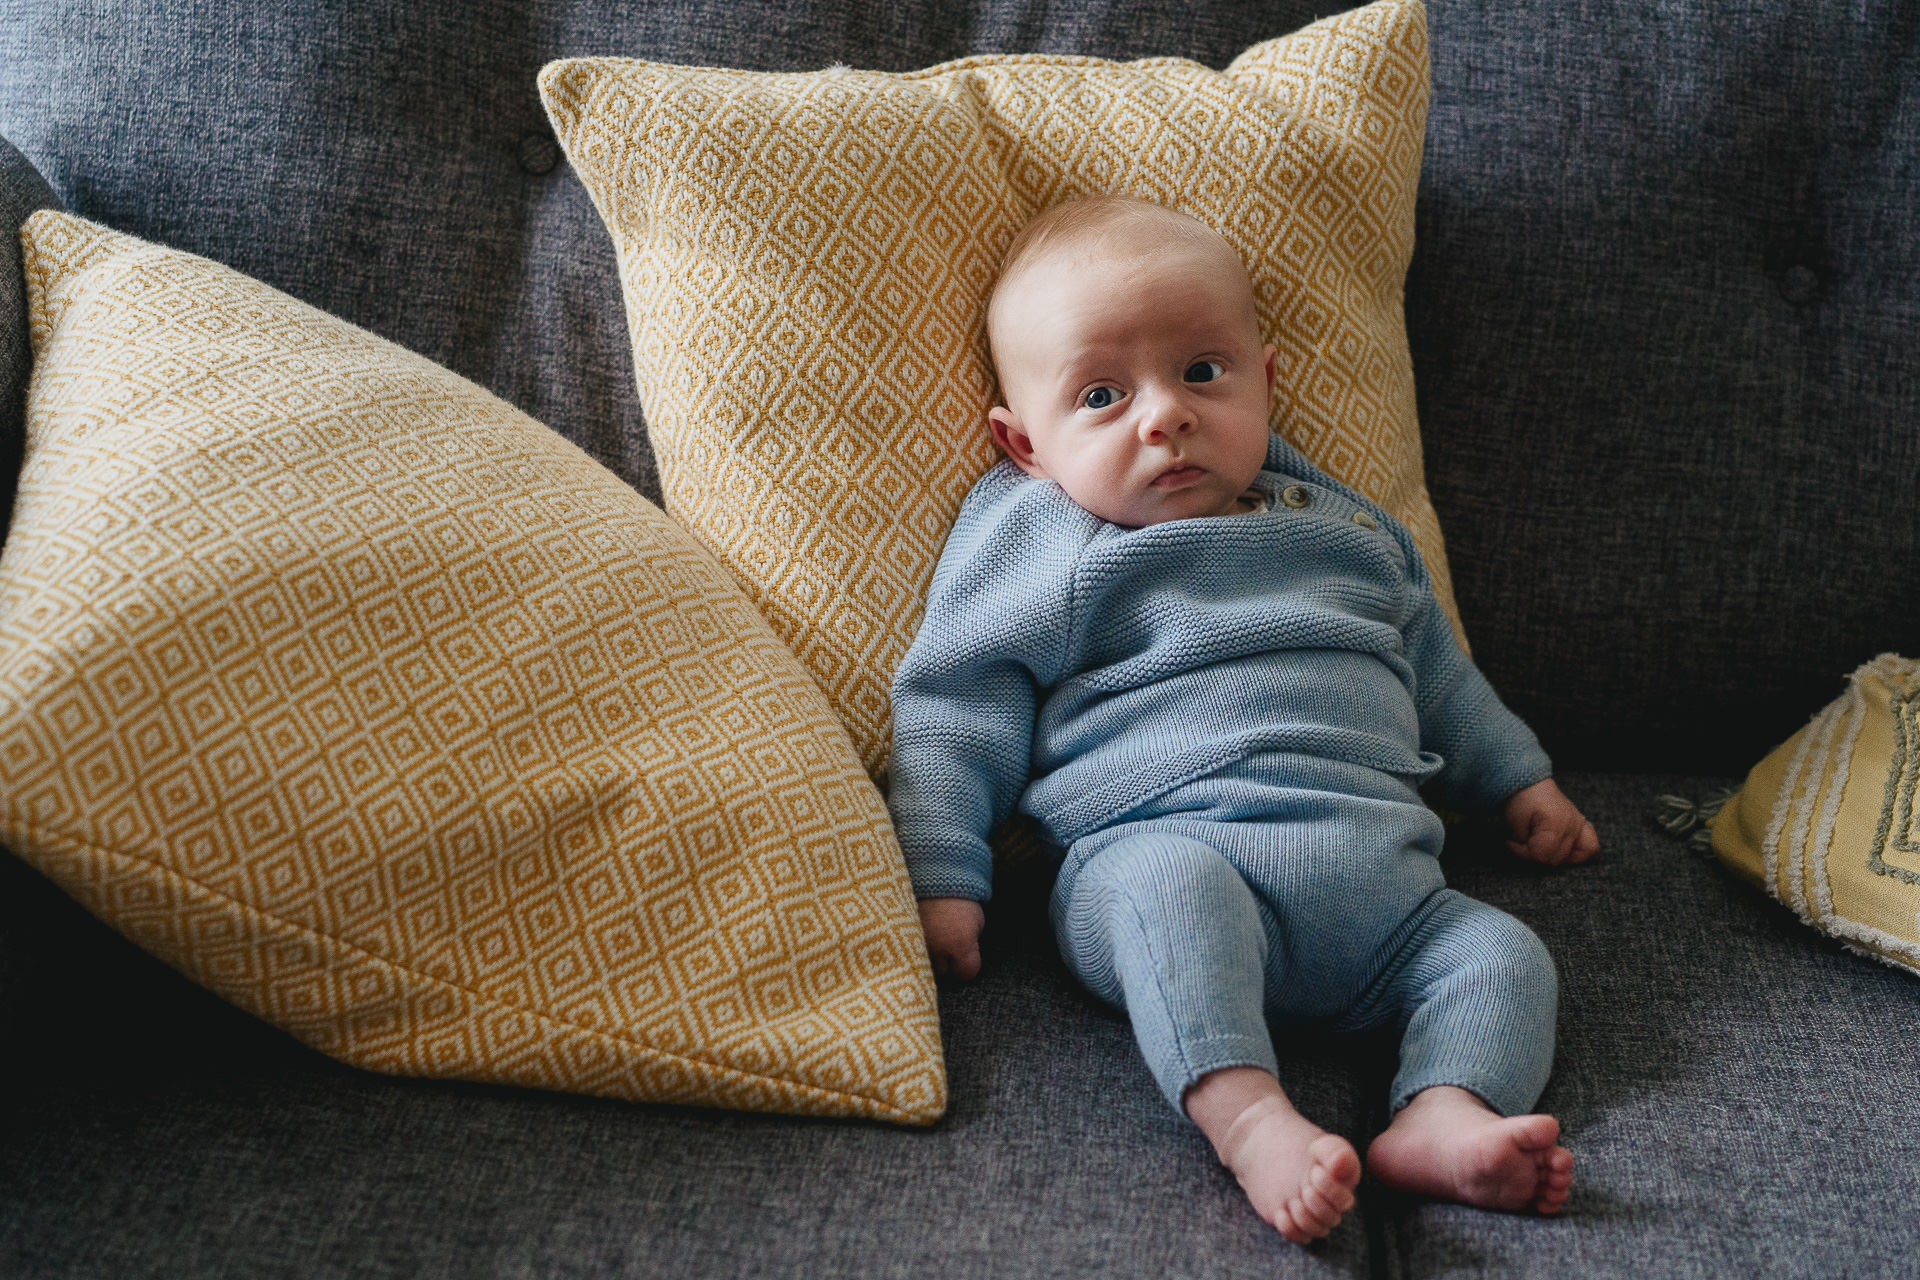 A baby sitting against yellow cushions